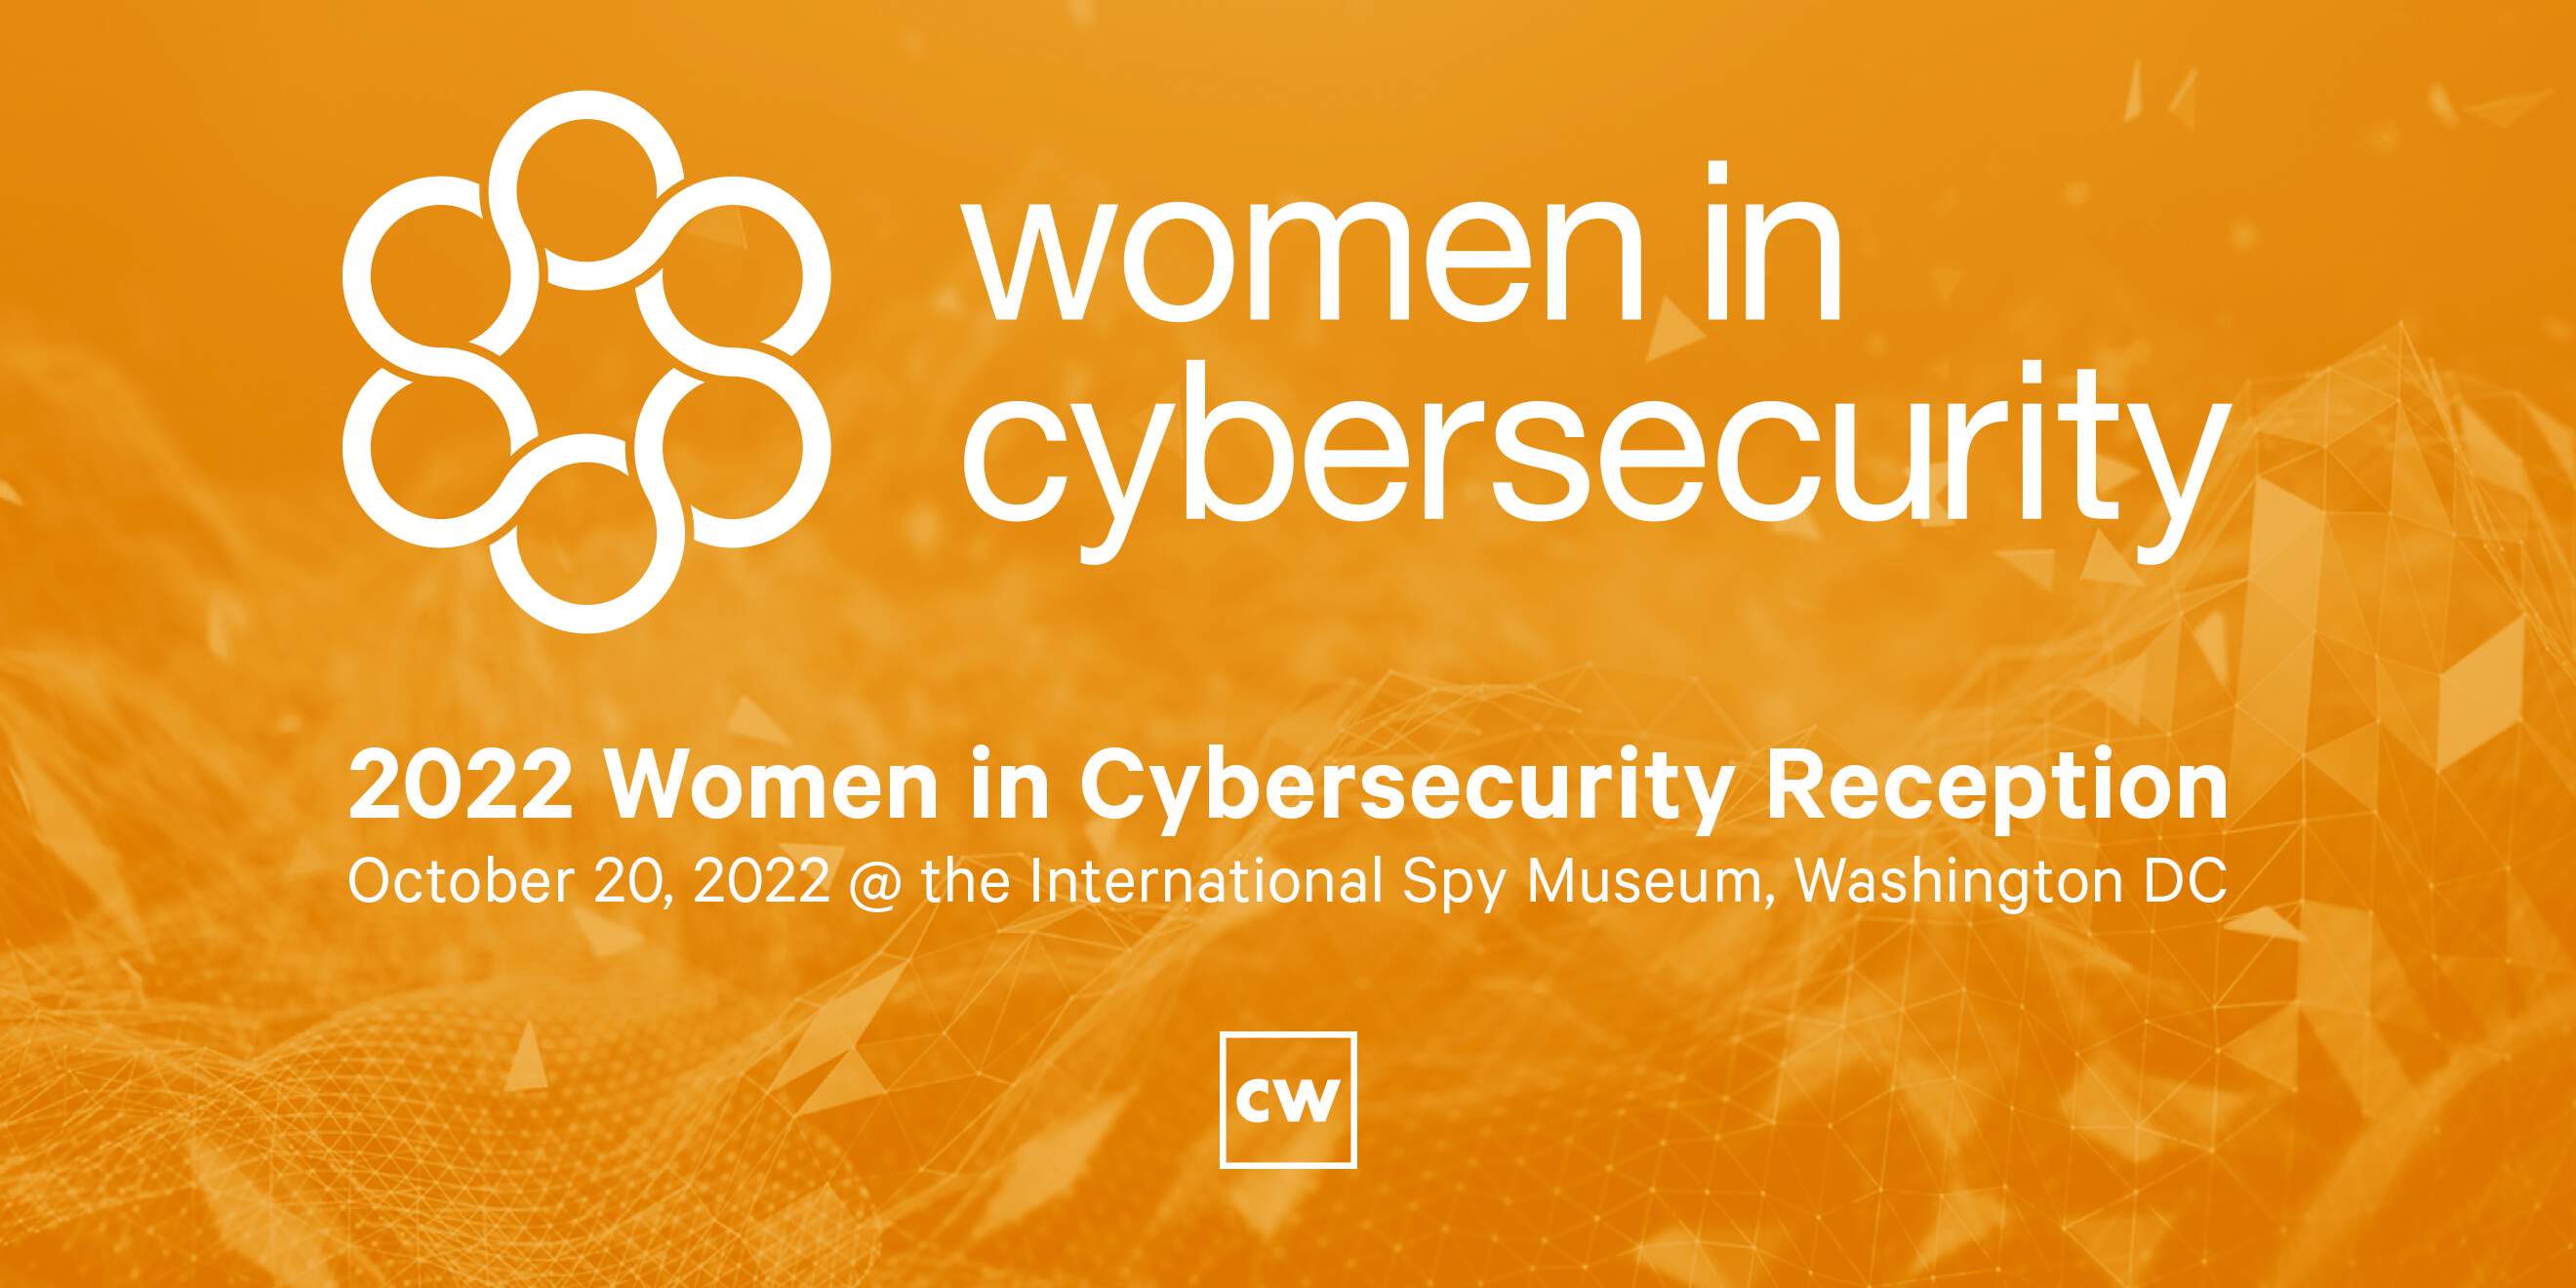 Women in cybersecurity to return to Washington DC to celebrate their contributions and successes across the industry.